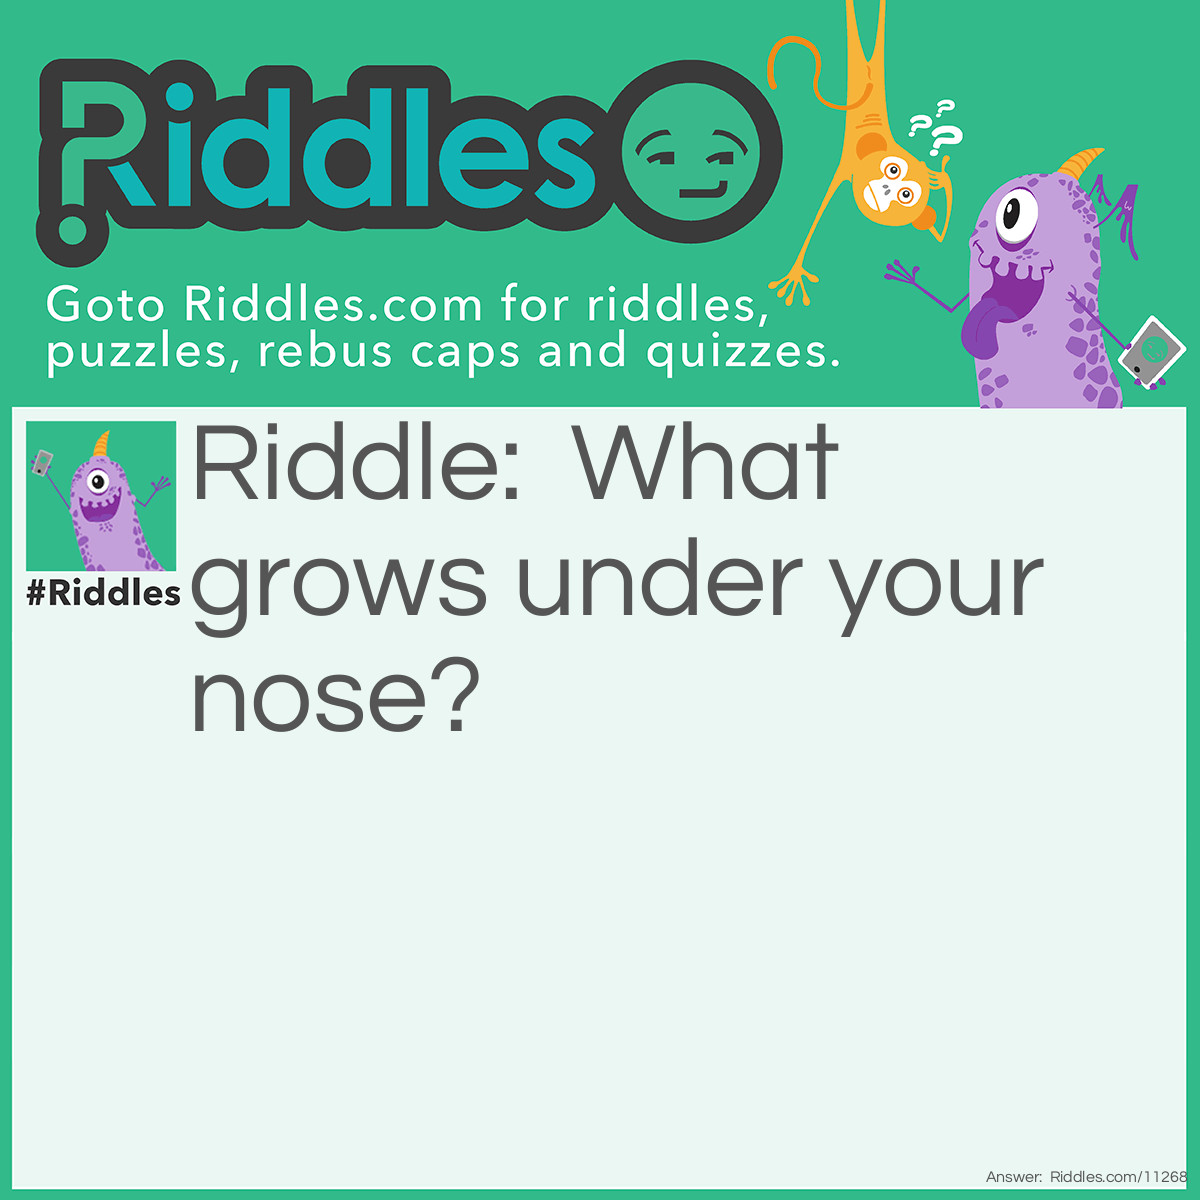 Riddle: What grows under your nose? Answer: Tulips (Two Lips).